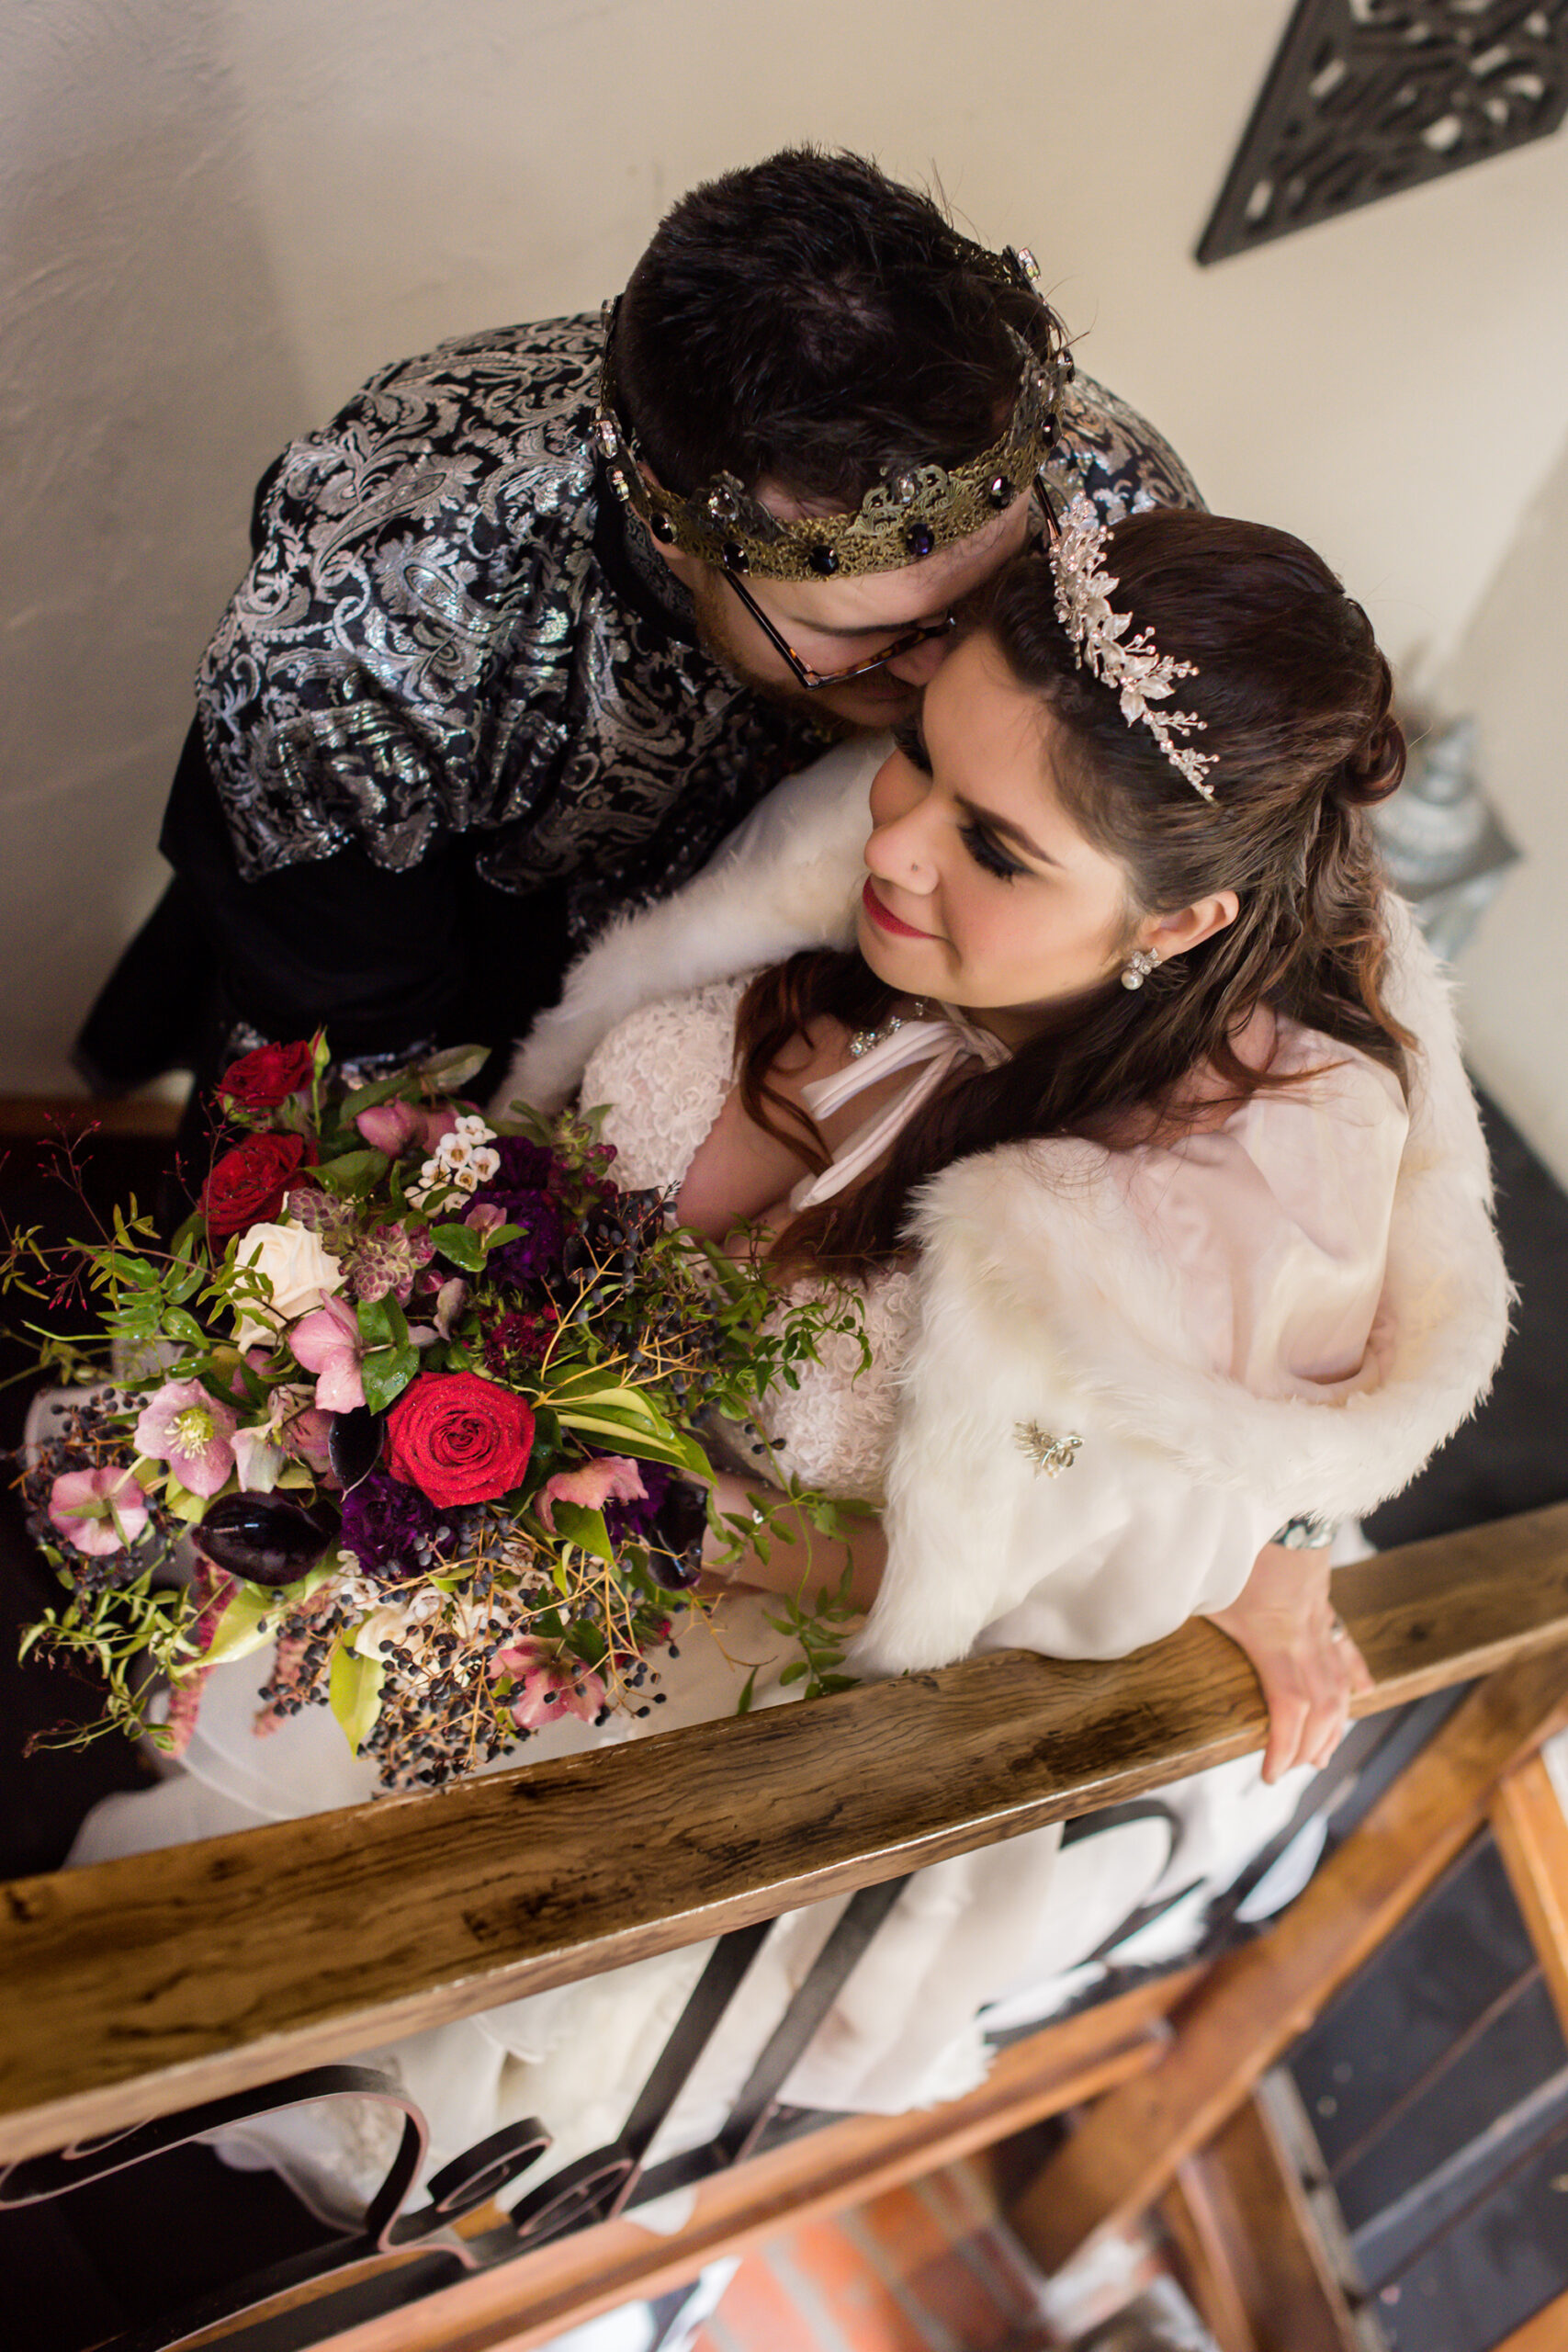 Denise Jake Medieval Wedding Photography House SBS 021 scaled